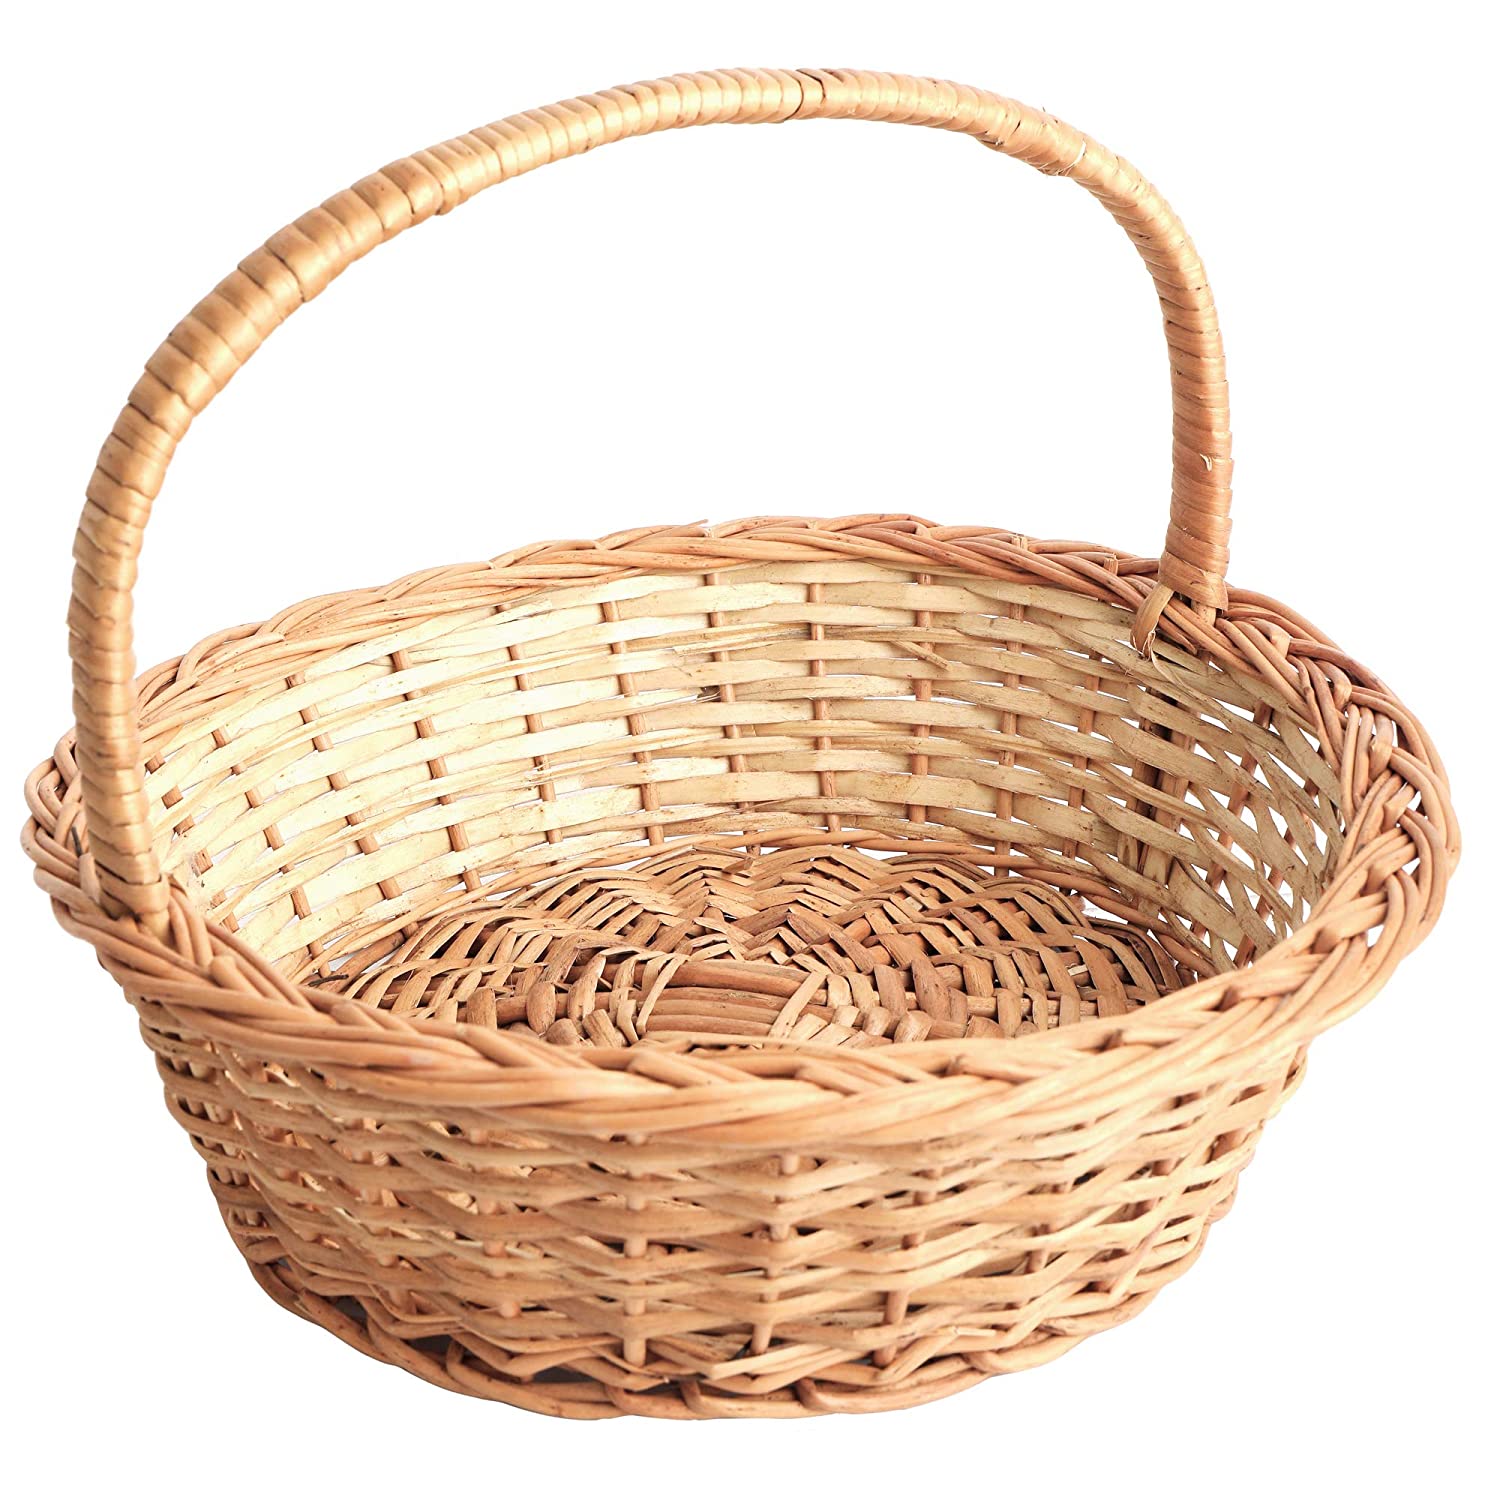 DaisyLife natural wicker round basket with handle